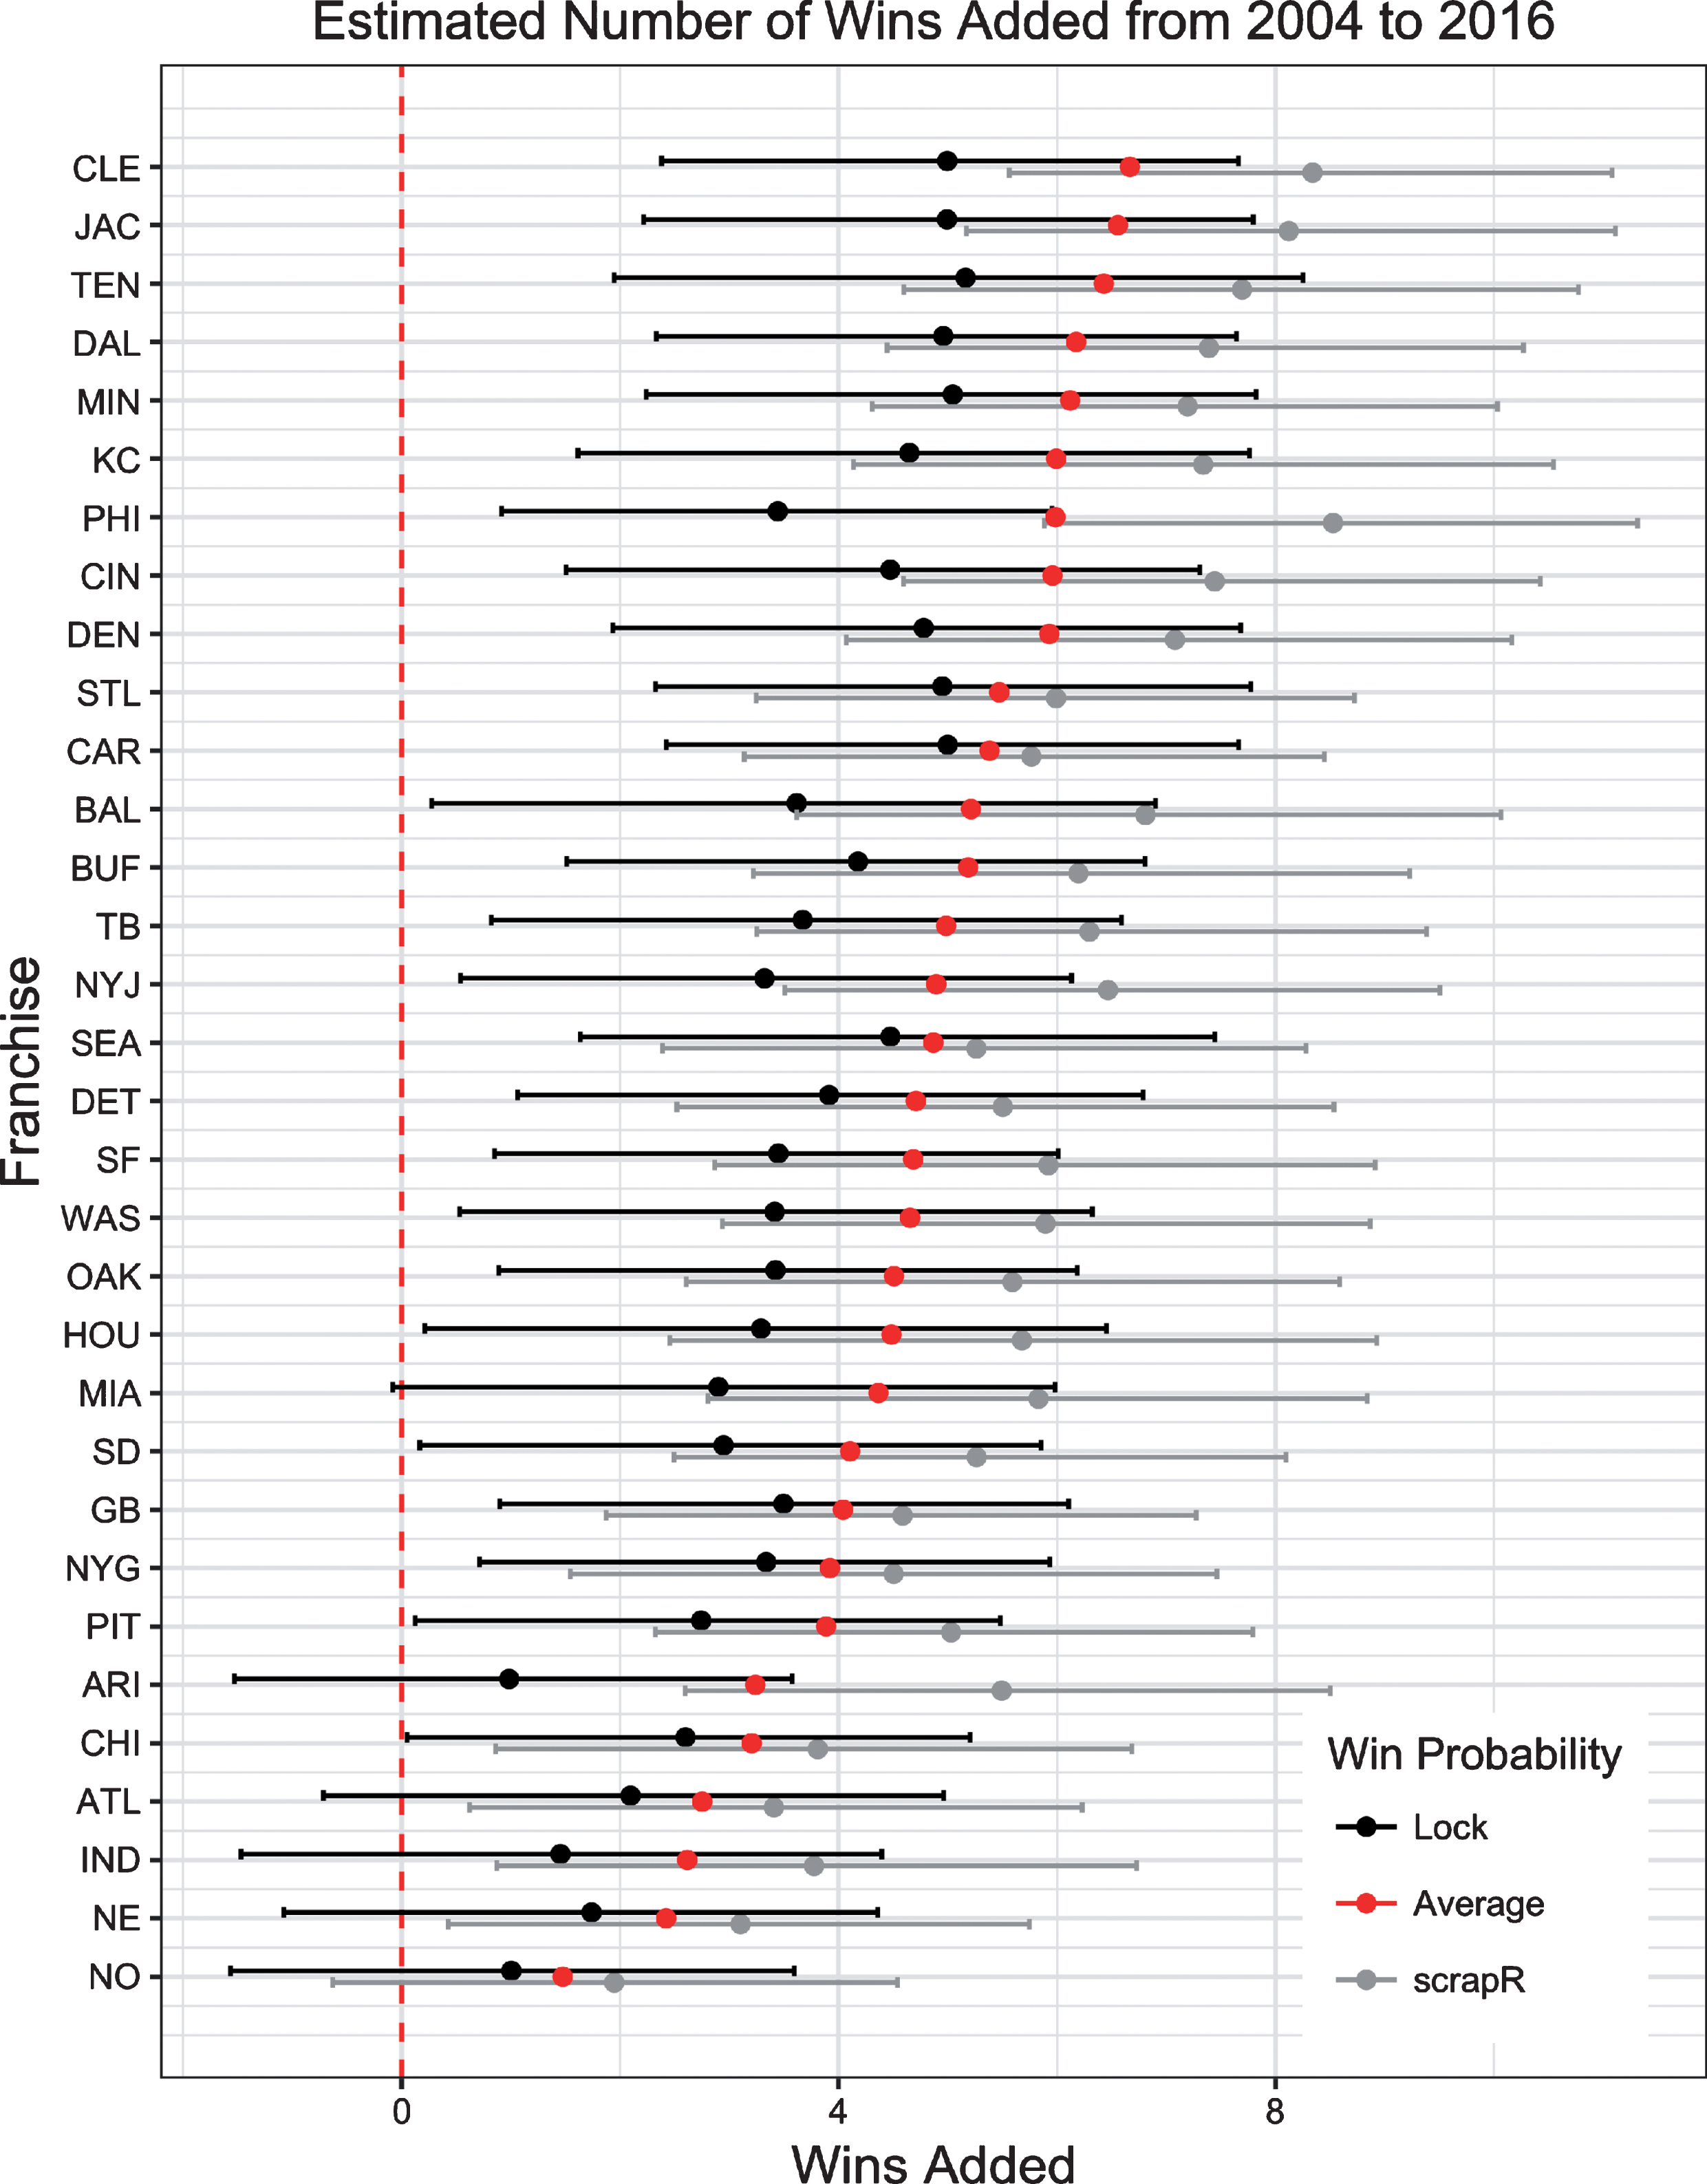 Bootstrapped results for the estimated number of wins added per team from 2004 to 2016. Confidence intervals are shown for each of the two win probability models, with the overall average shown in red.